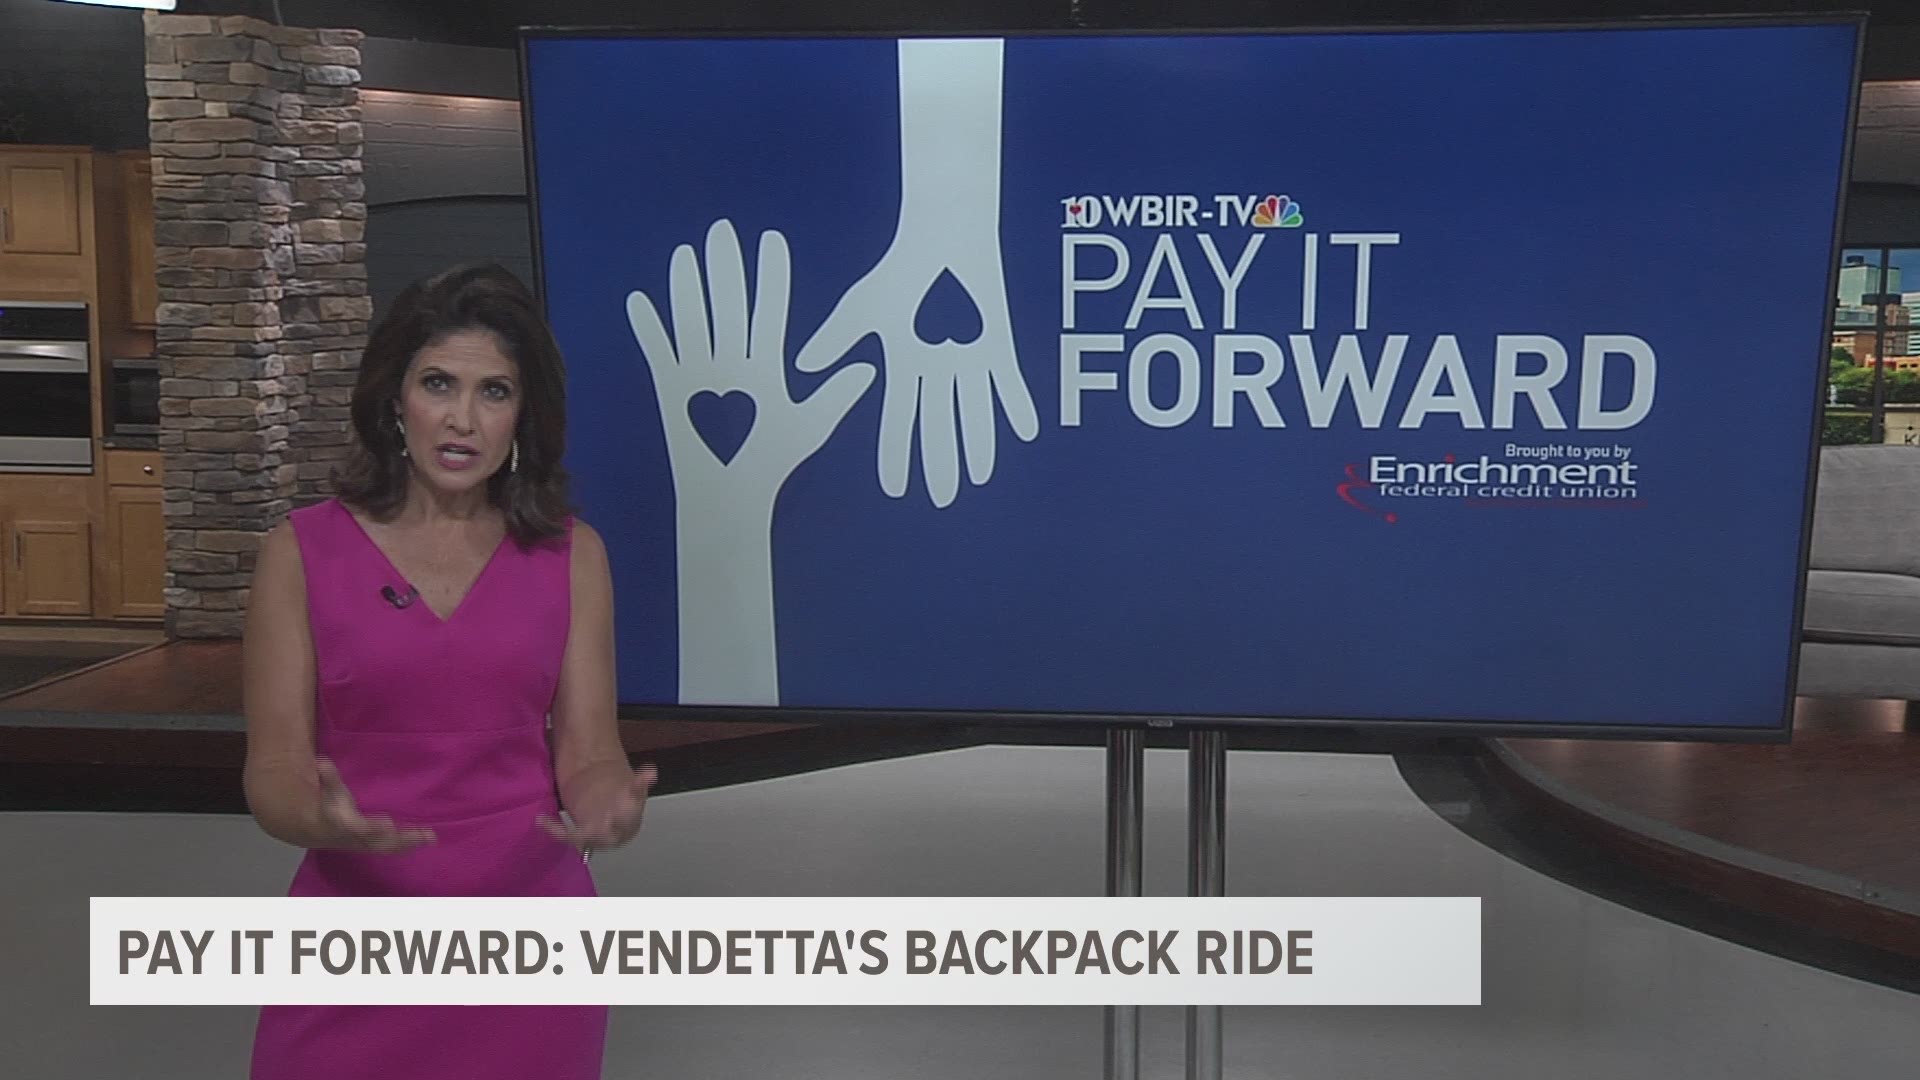 After completing their Backpack Ride in July, the Vendetta's were able to donate 60 filled backpacks to help kids in need.